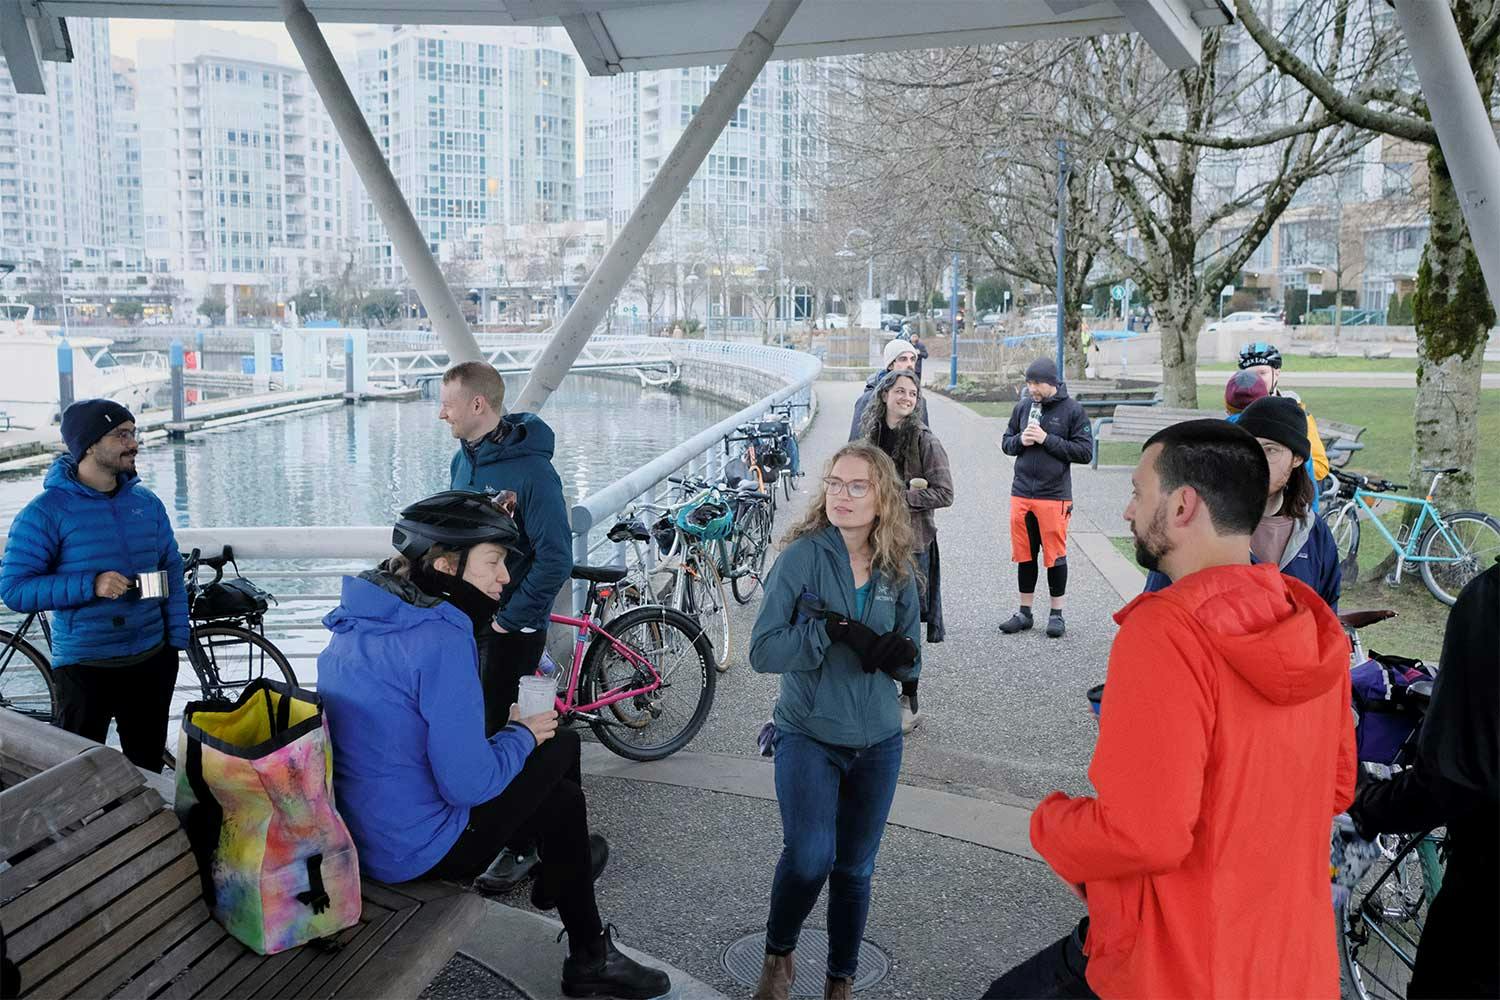 A group of cyclists drink coffee at a harbourfront park in Vancouver, their bikes parked against railings and trees nearby.